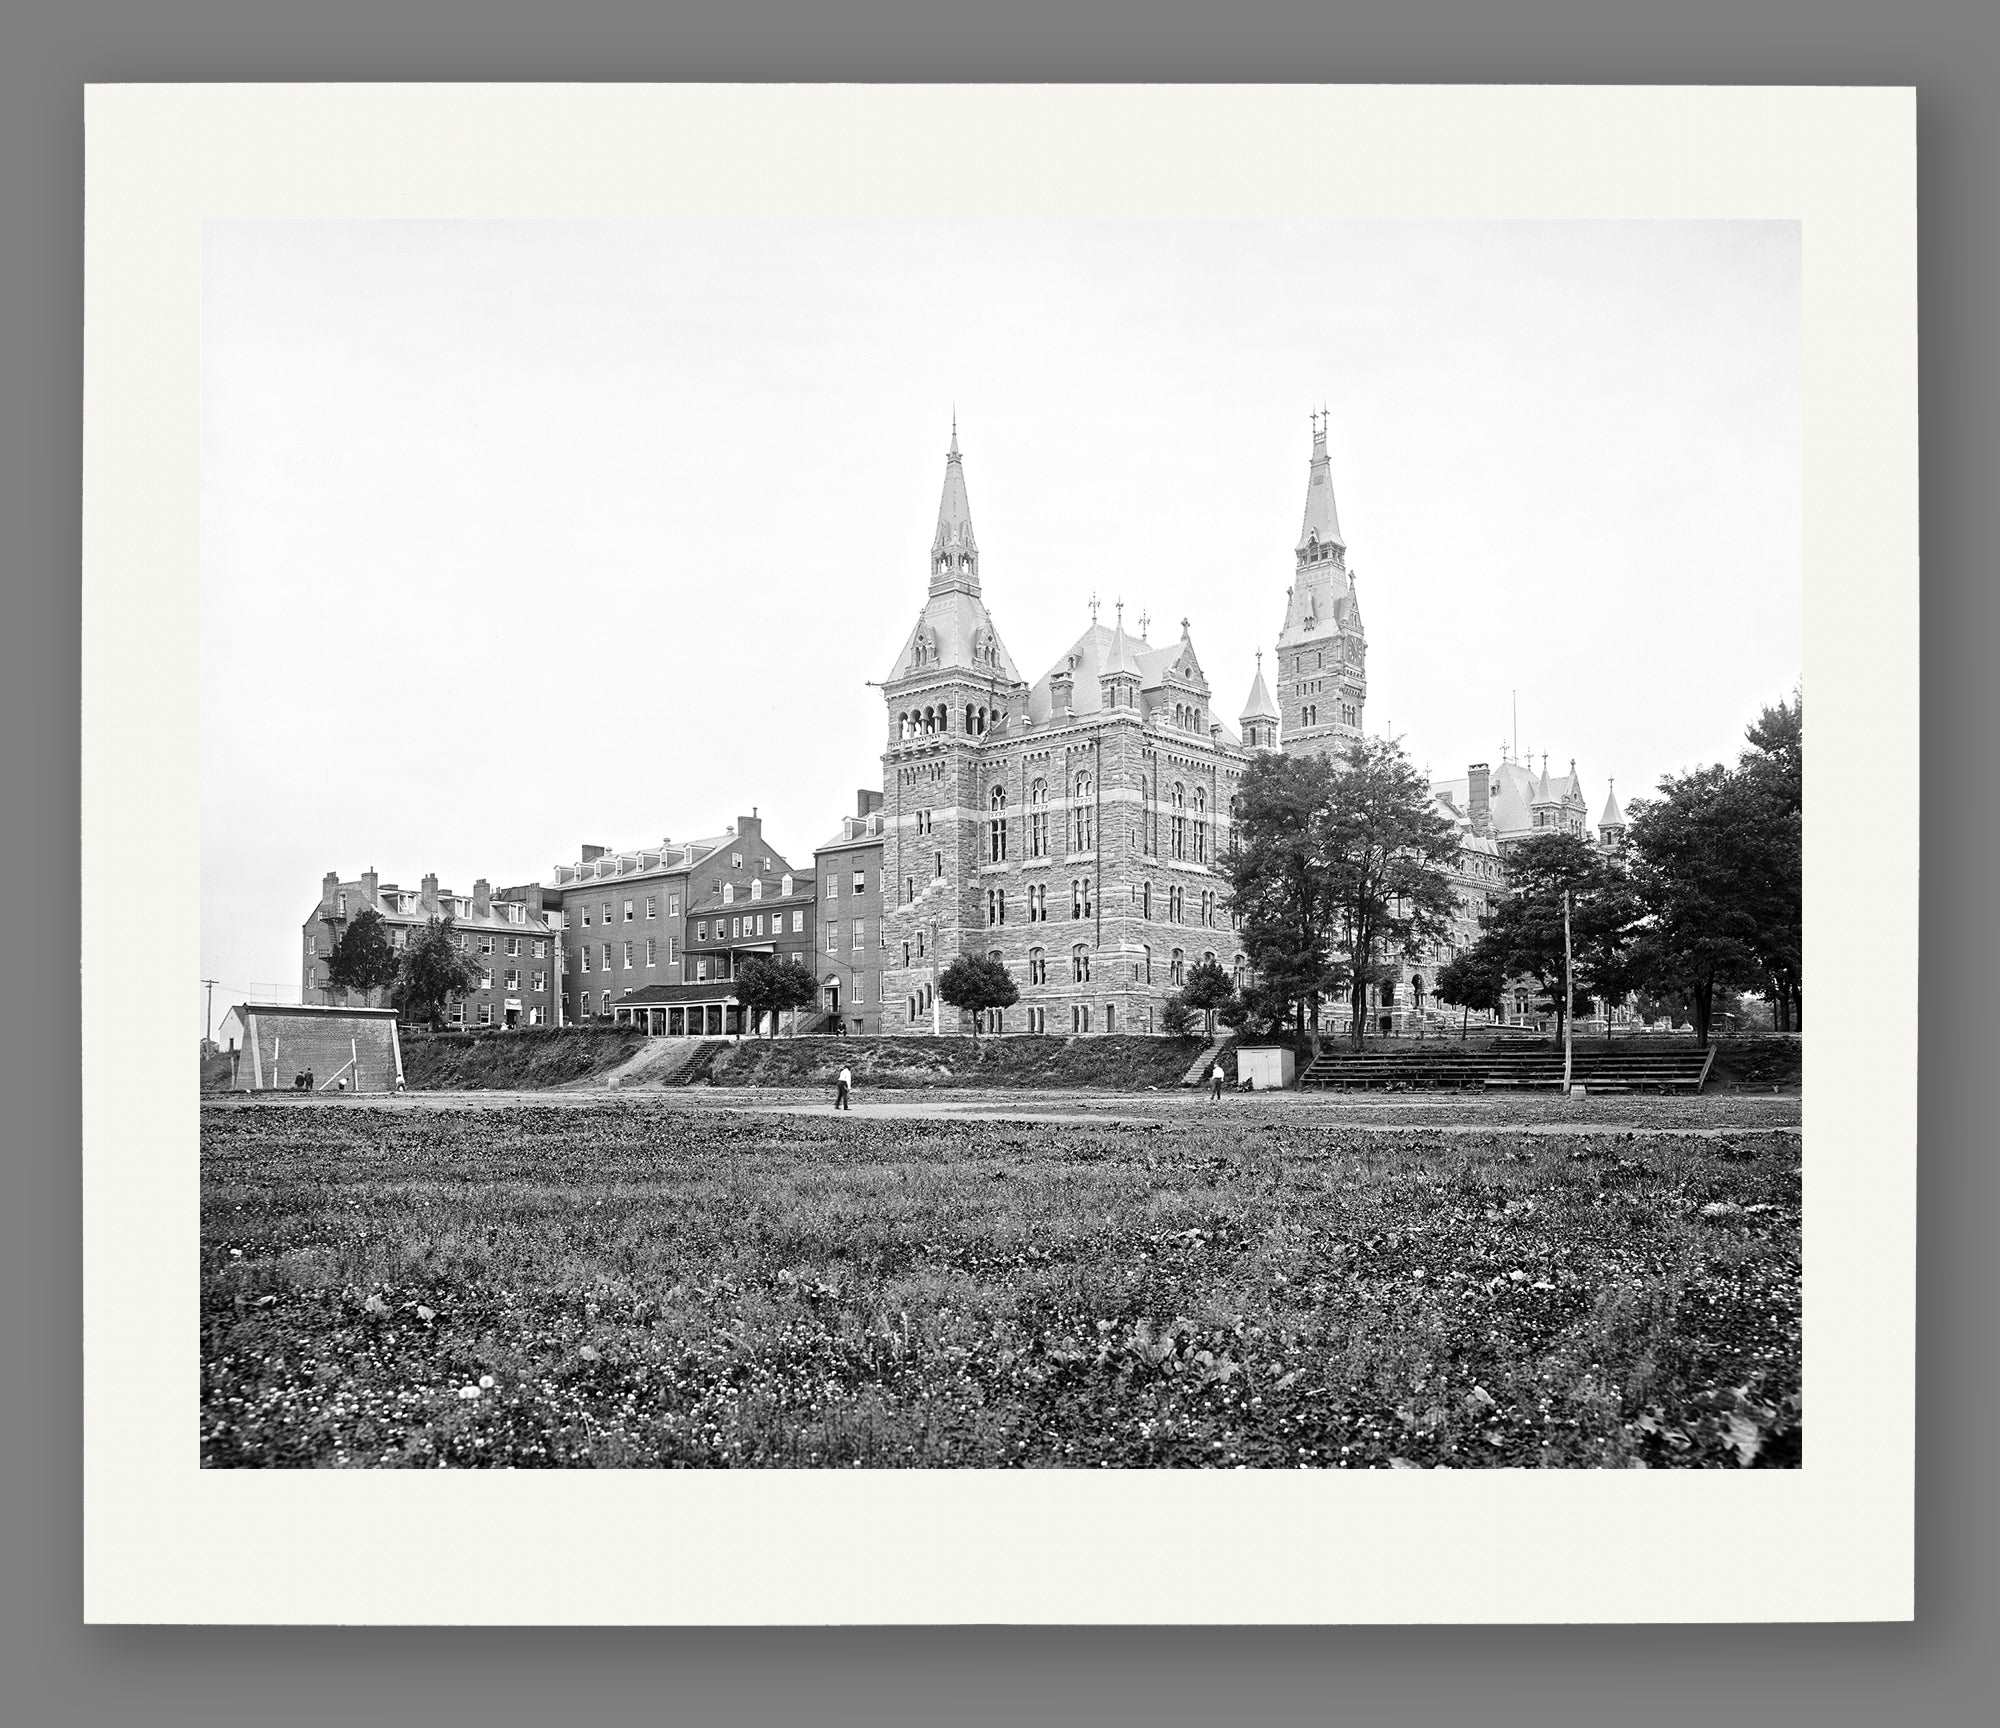 A paper reproduction print of a vintage image of Georgetown University in Washington DC